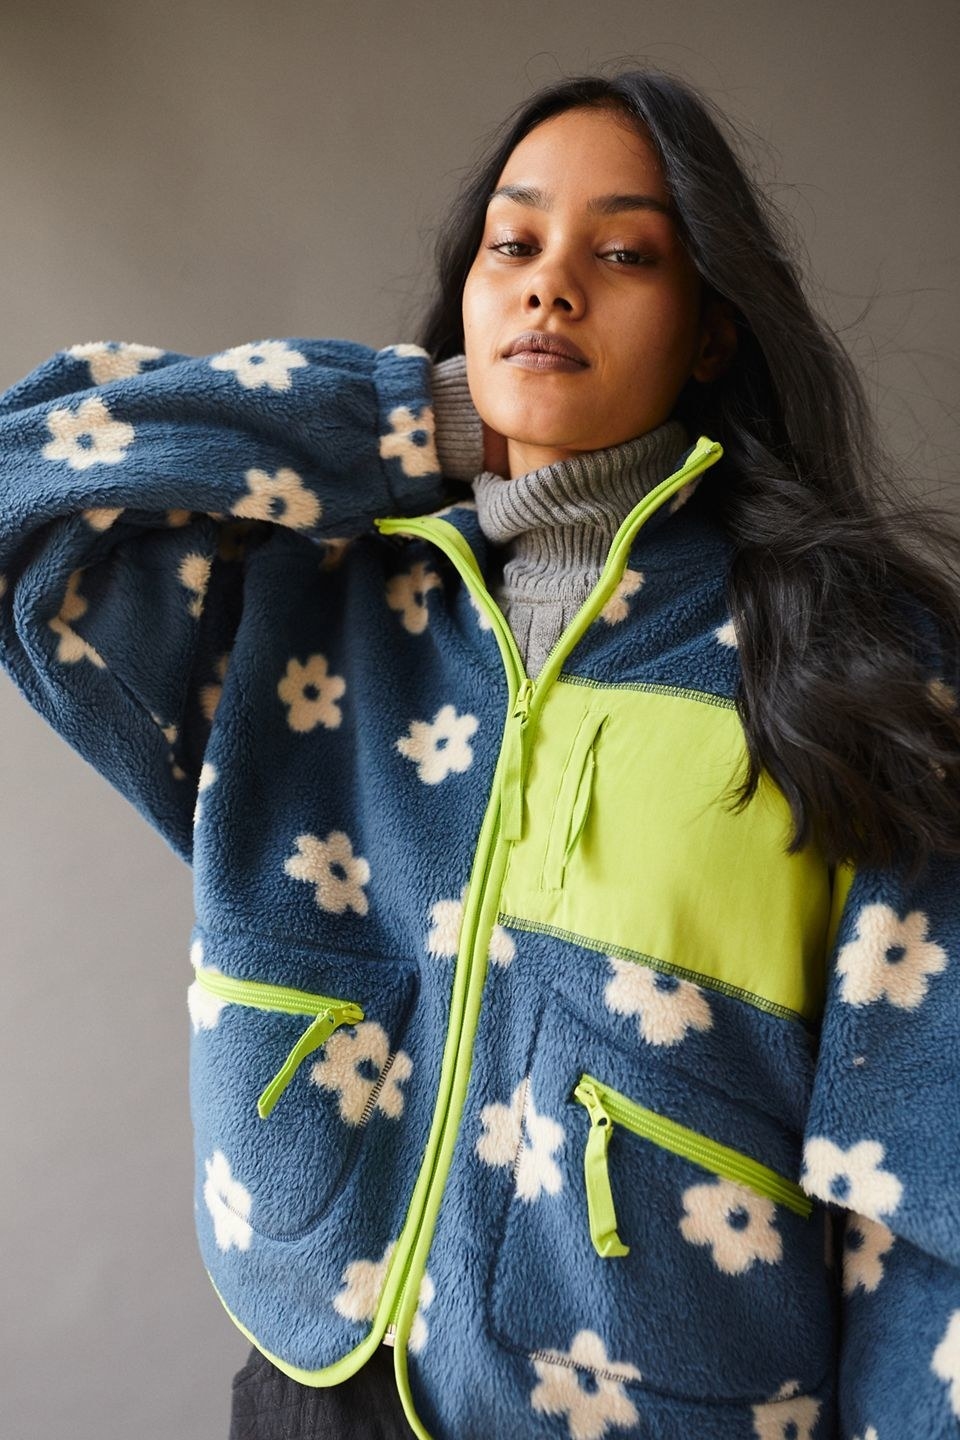 model wearing the blue fleece jacket with white floral design and lime green trim, zippers, and pocket